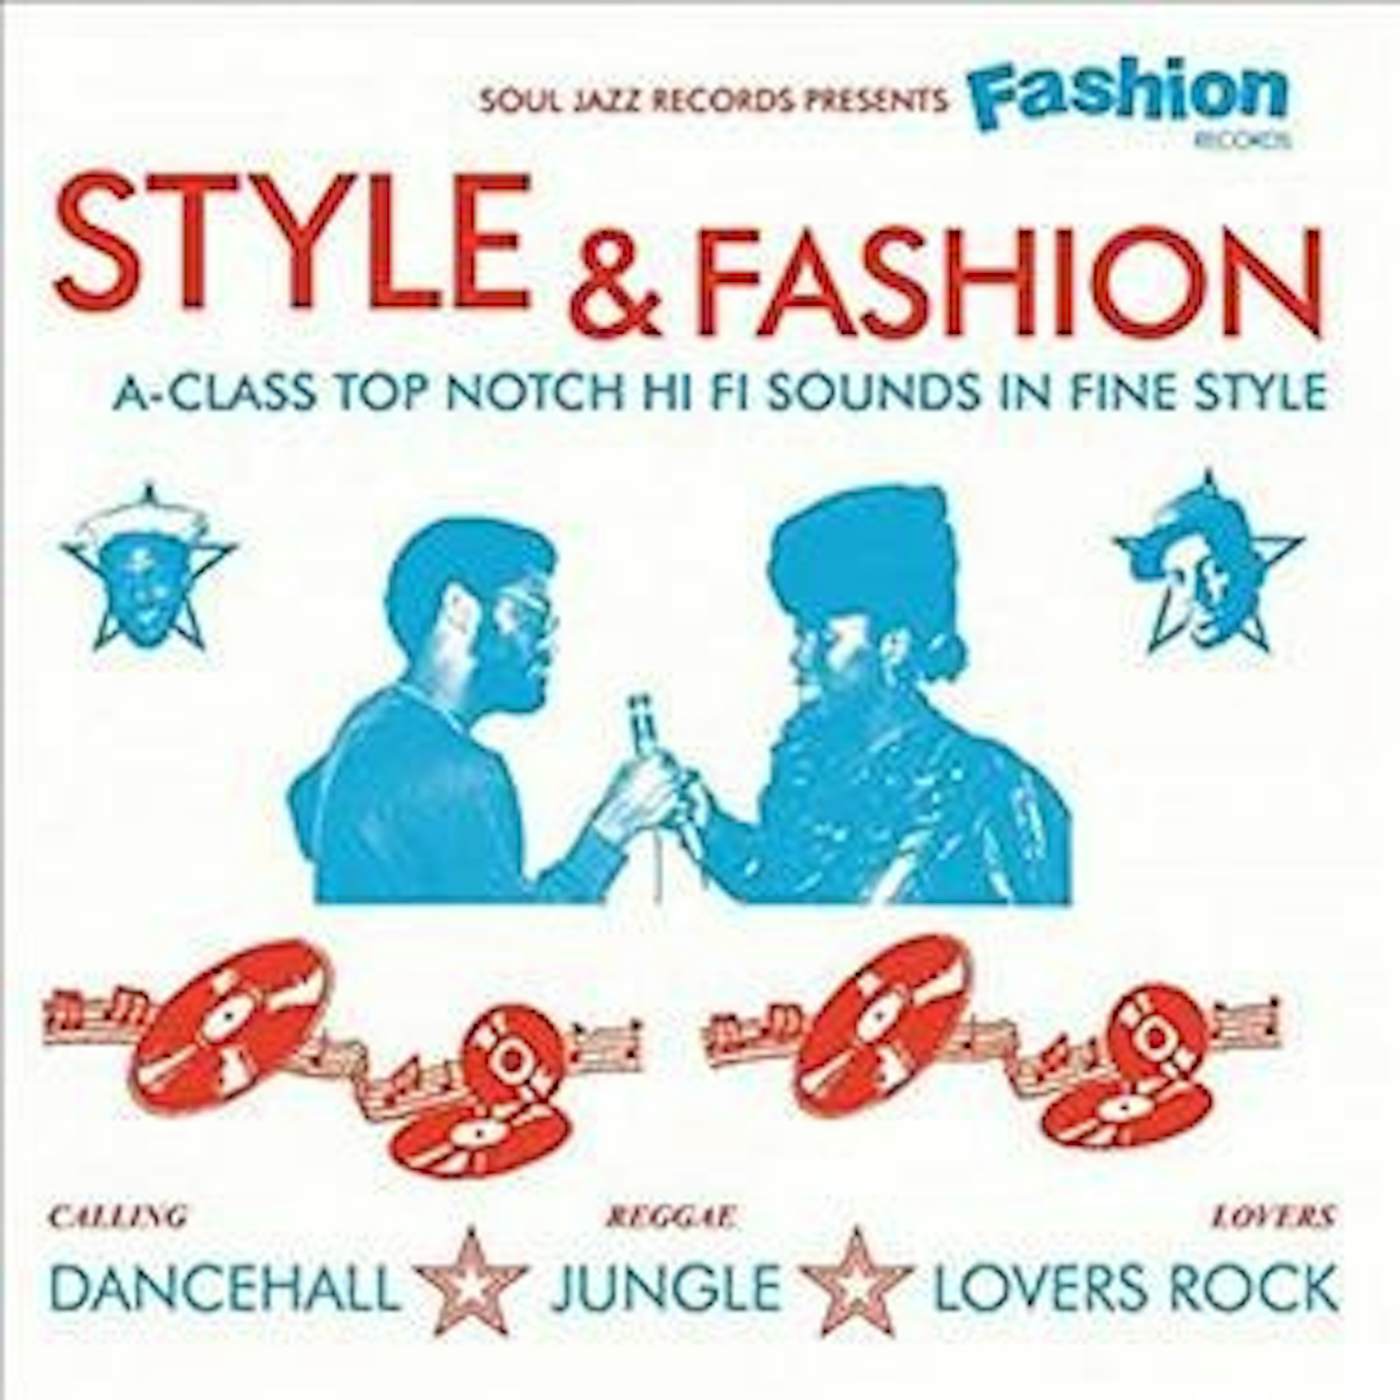 General Levy / Laurel & Hardy / Cutty Ranks Soul Jazz Records Presents Fashion Records: Style & Fashion CD